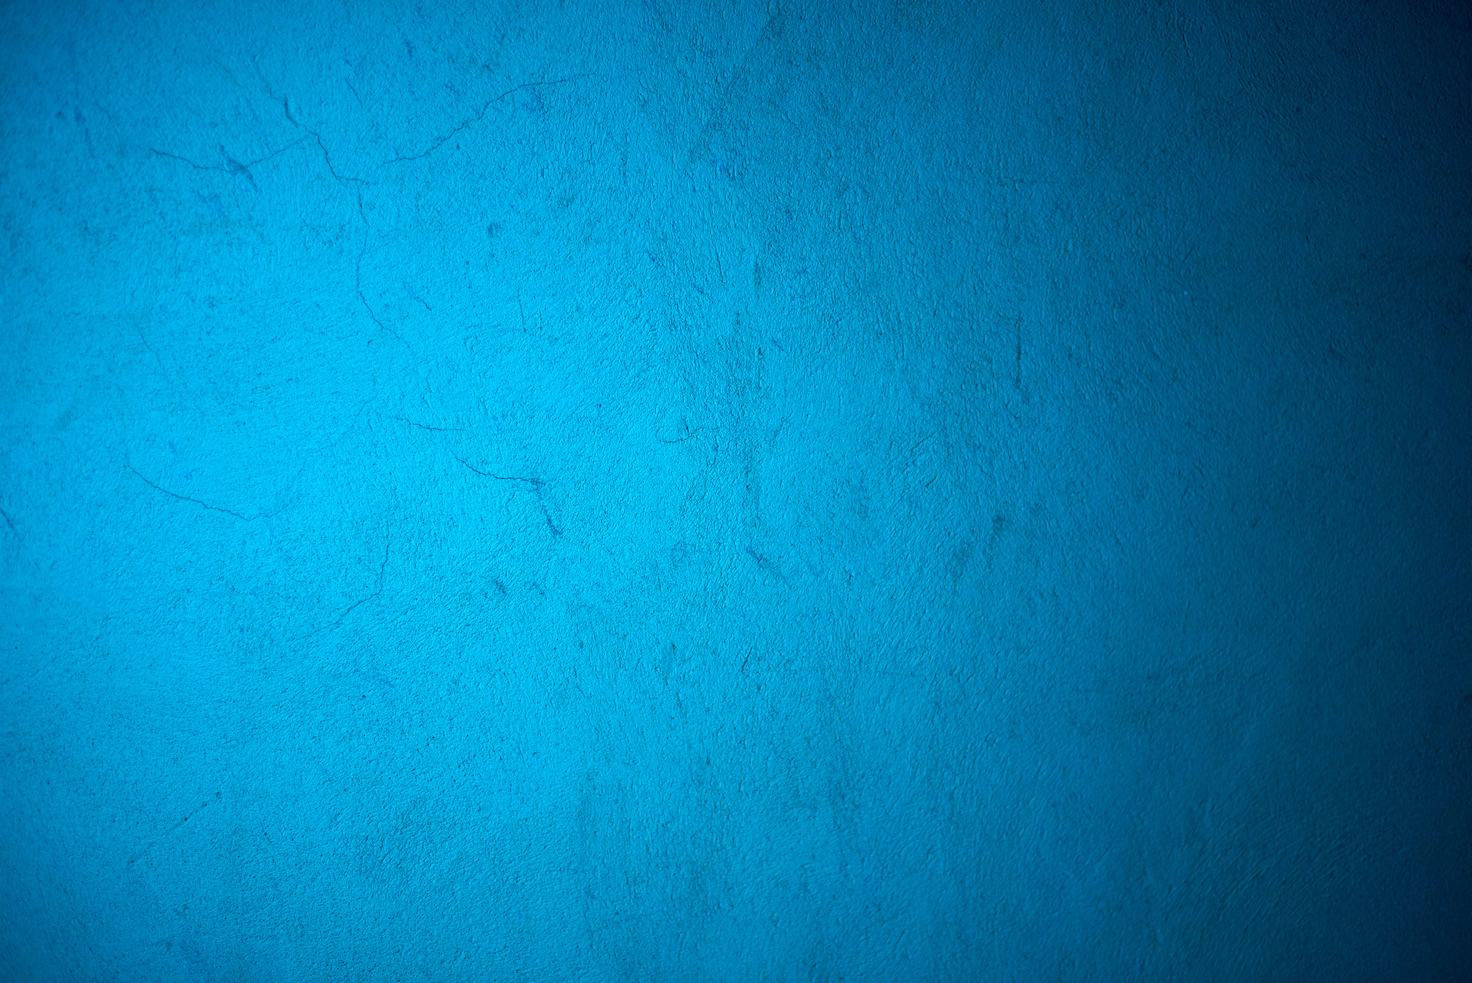 Neon blue light reflecting on concrete wall